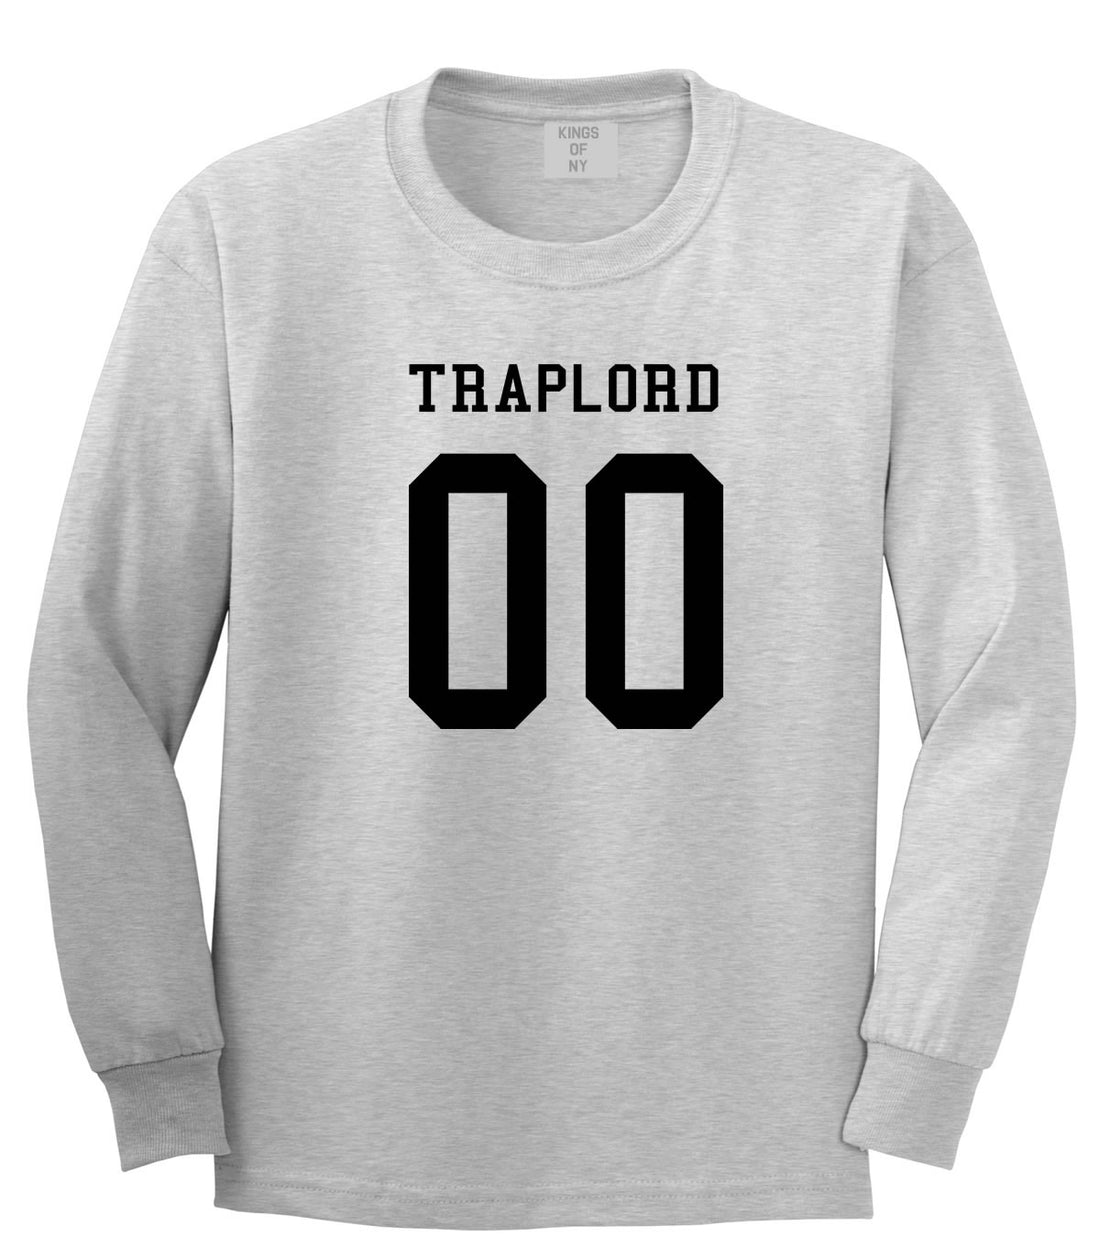 Traplord Team Jersey 00 Trap Lord Long Sleeve T-Shirt in Grey By Kings Of NY